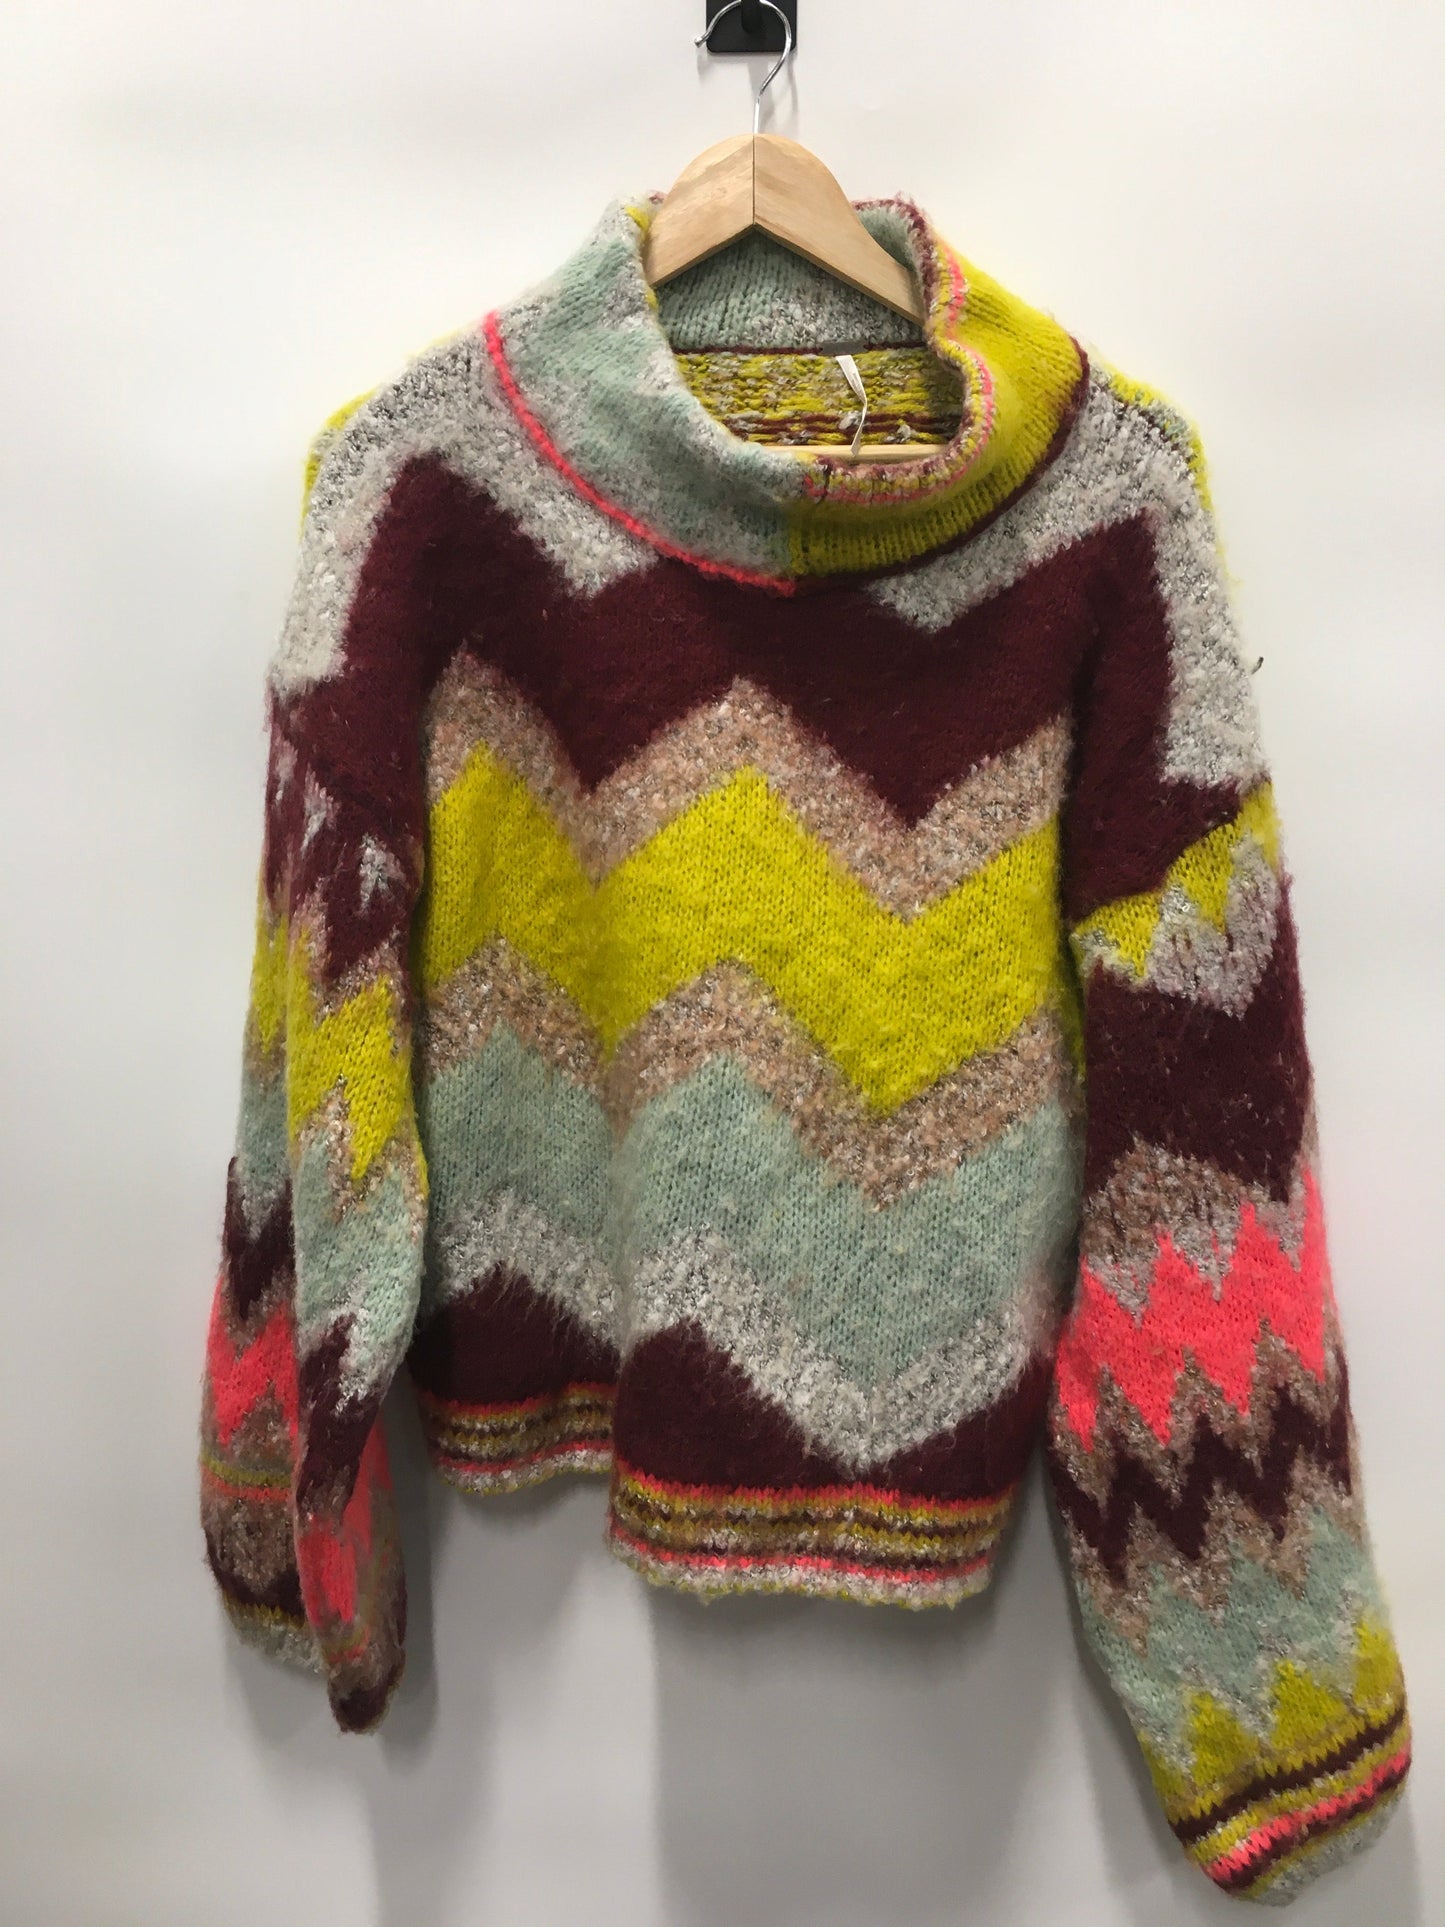 Multi-colored Sweater Free People, Size M